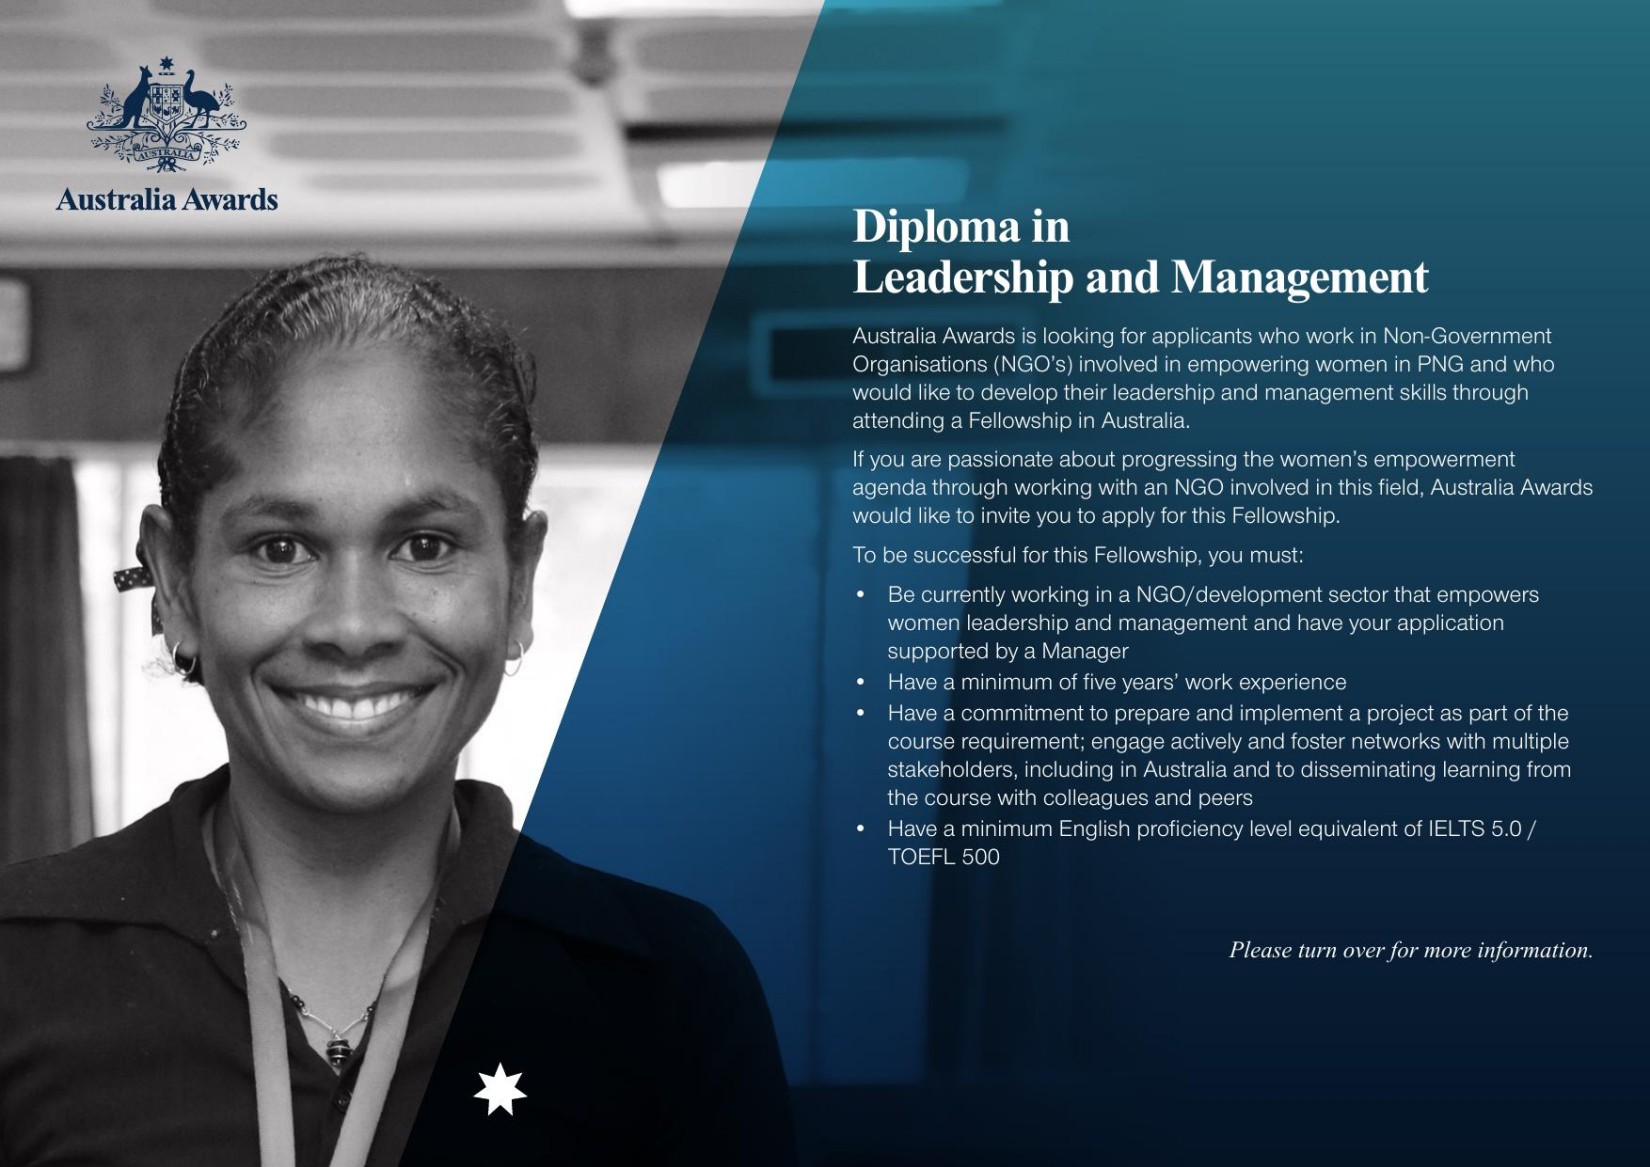 Diploma in Leadership and Management